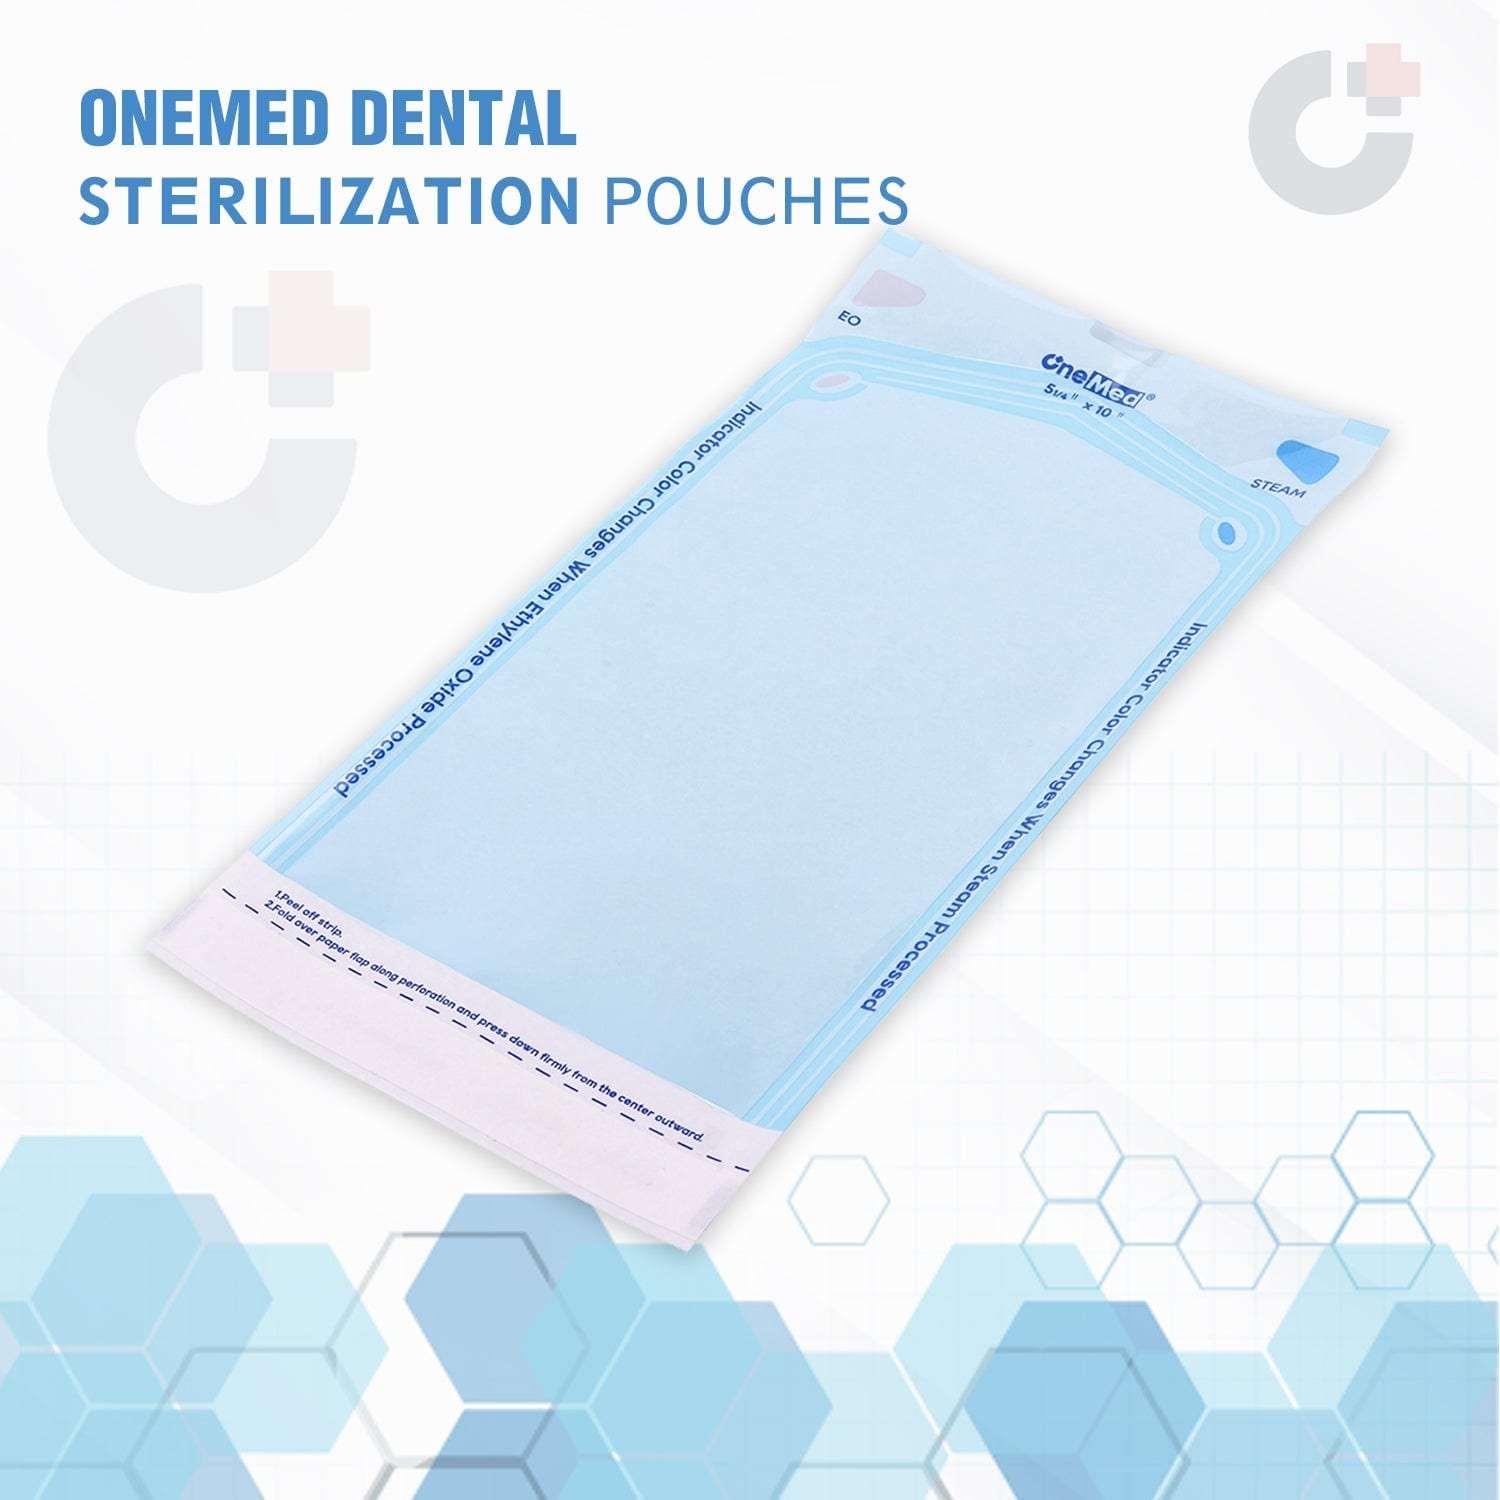 OneMed Dental Self-Sealing Sterilization Pouches 5.25x10 inch 200/Box - OneMed Dental